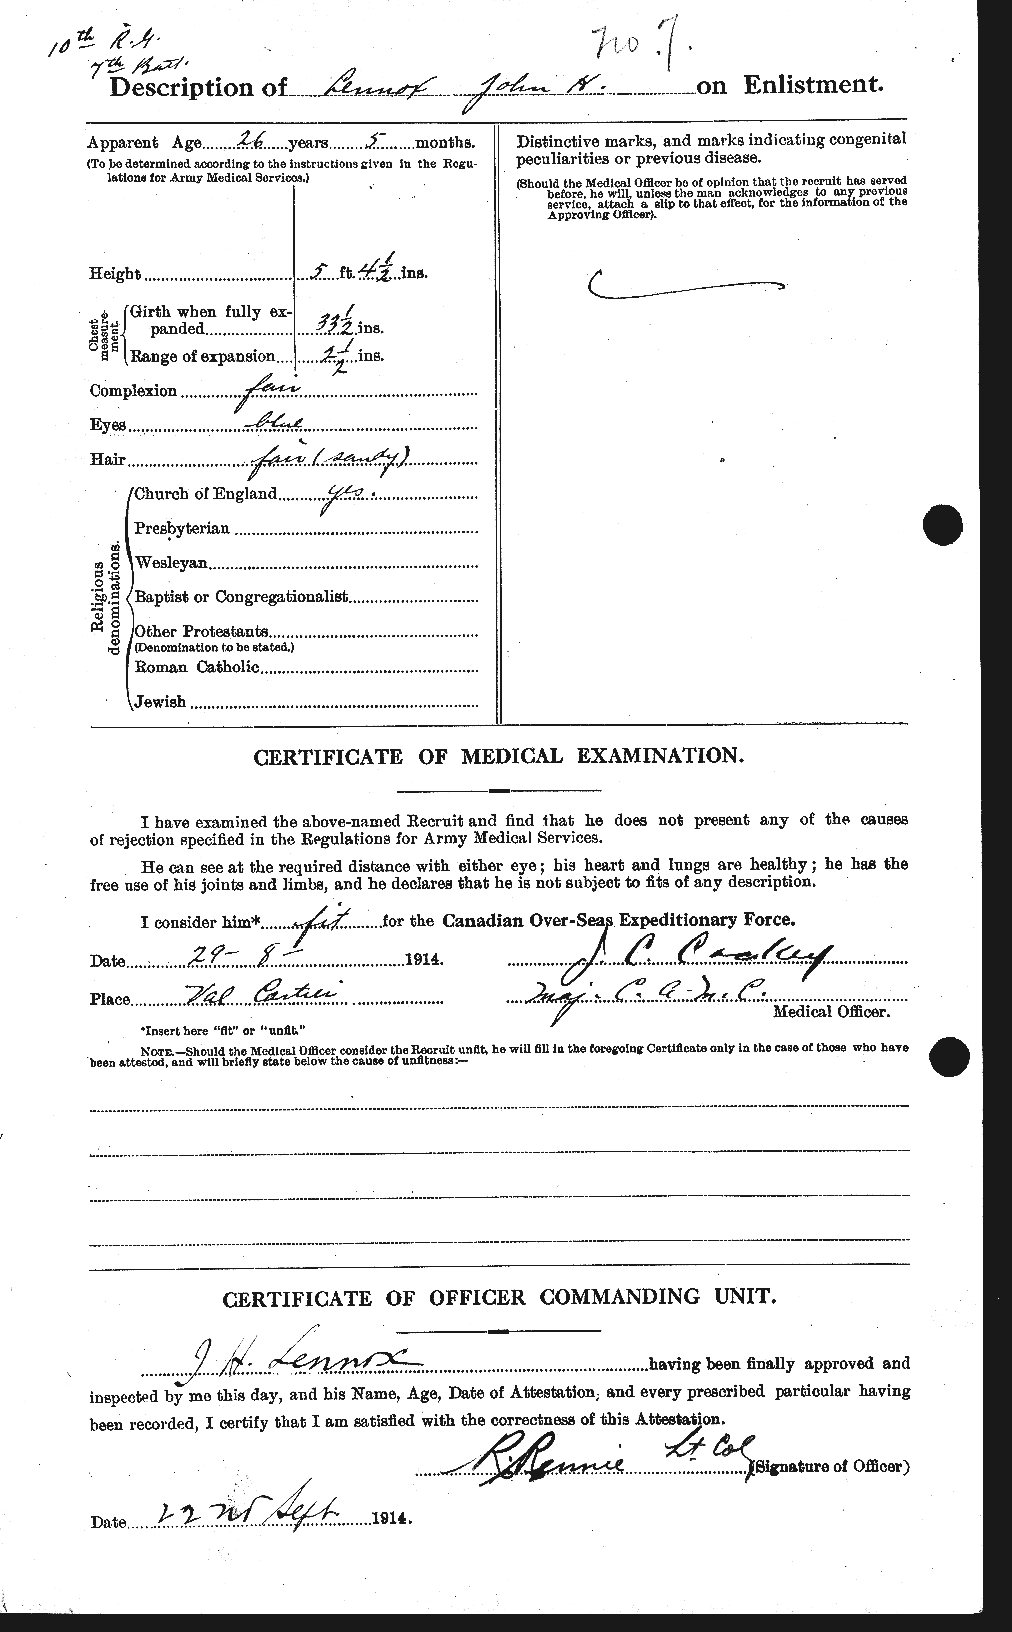 Personnel Records of the First World War - CEF 458686b